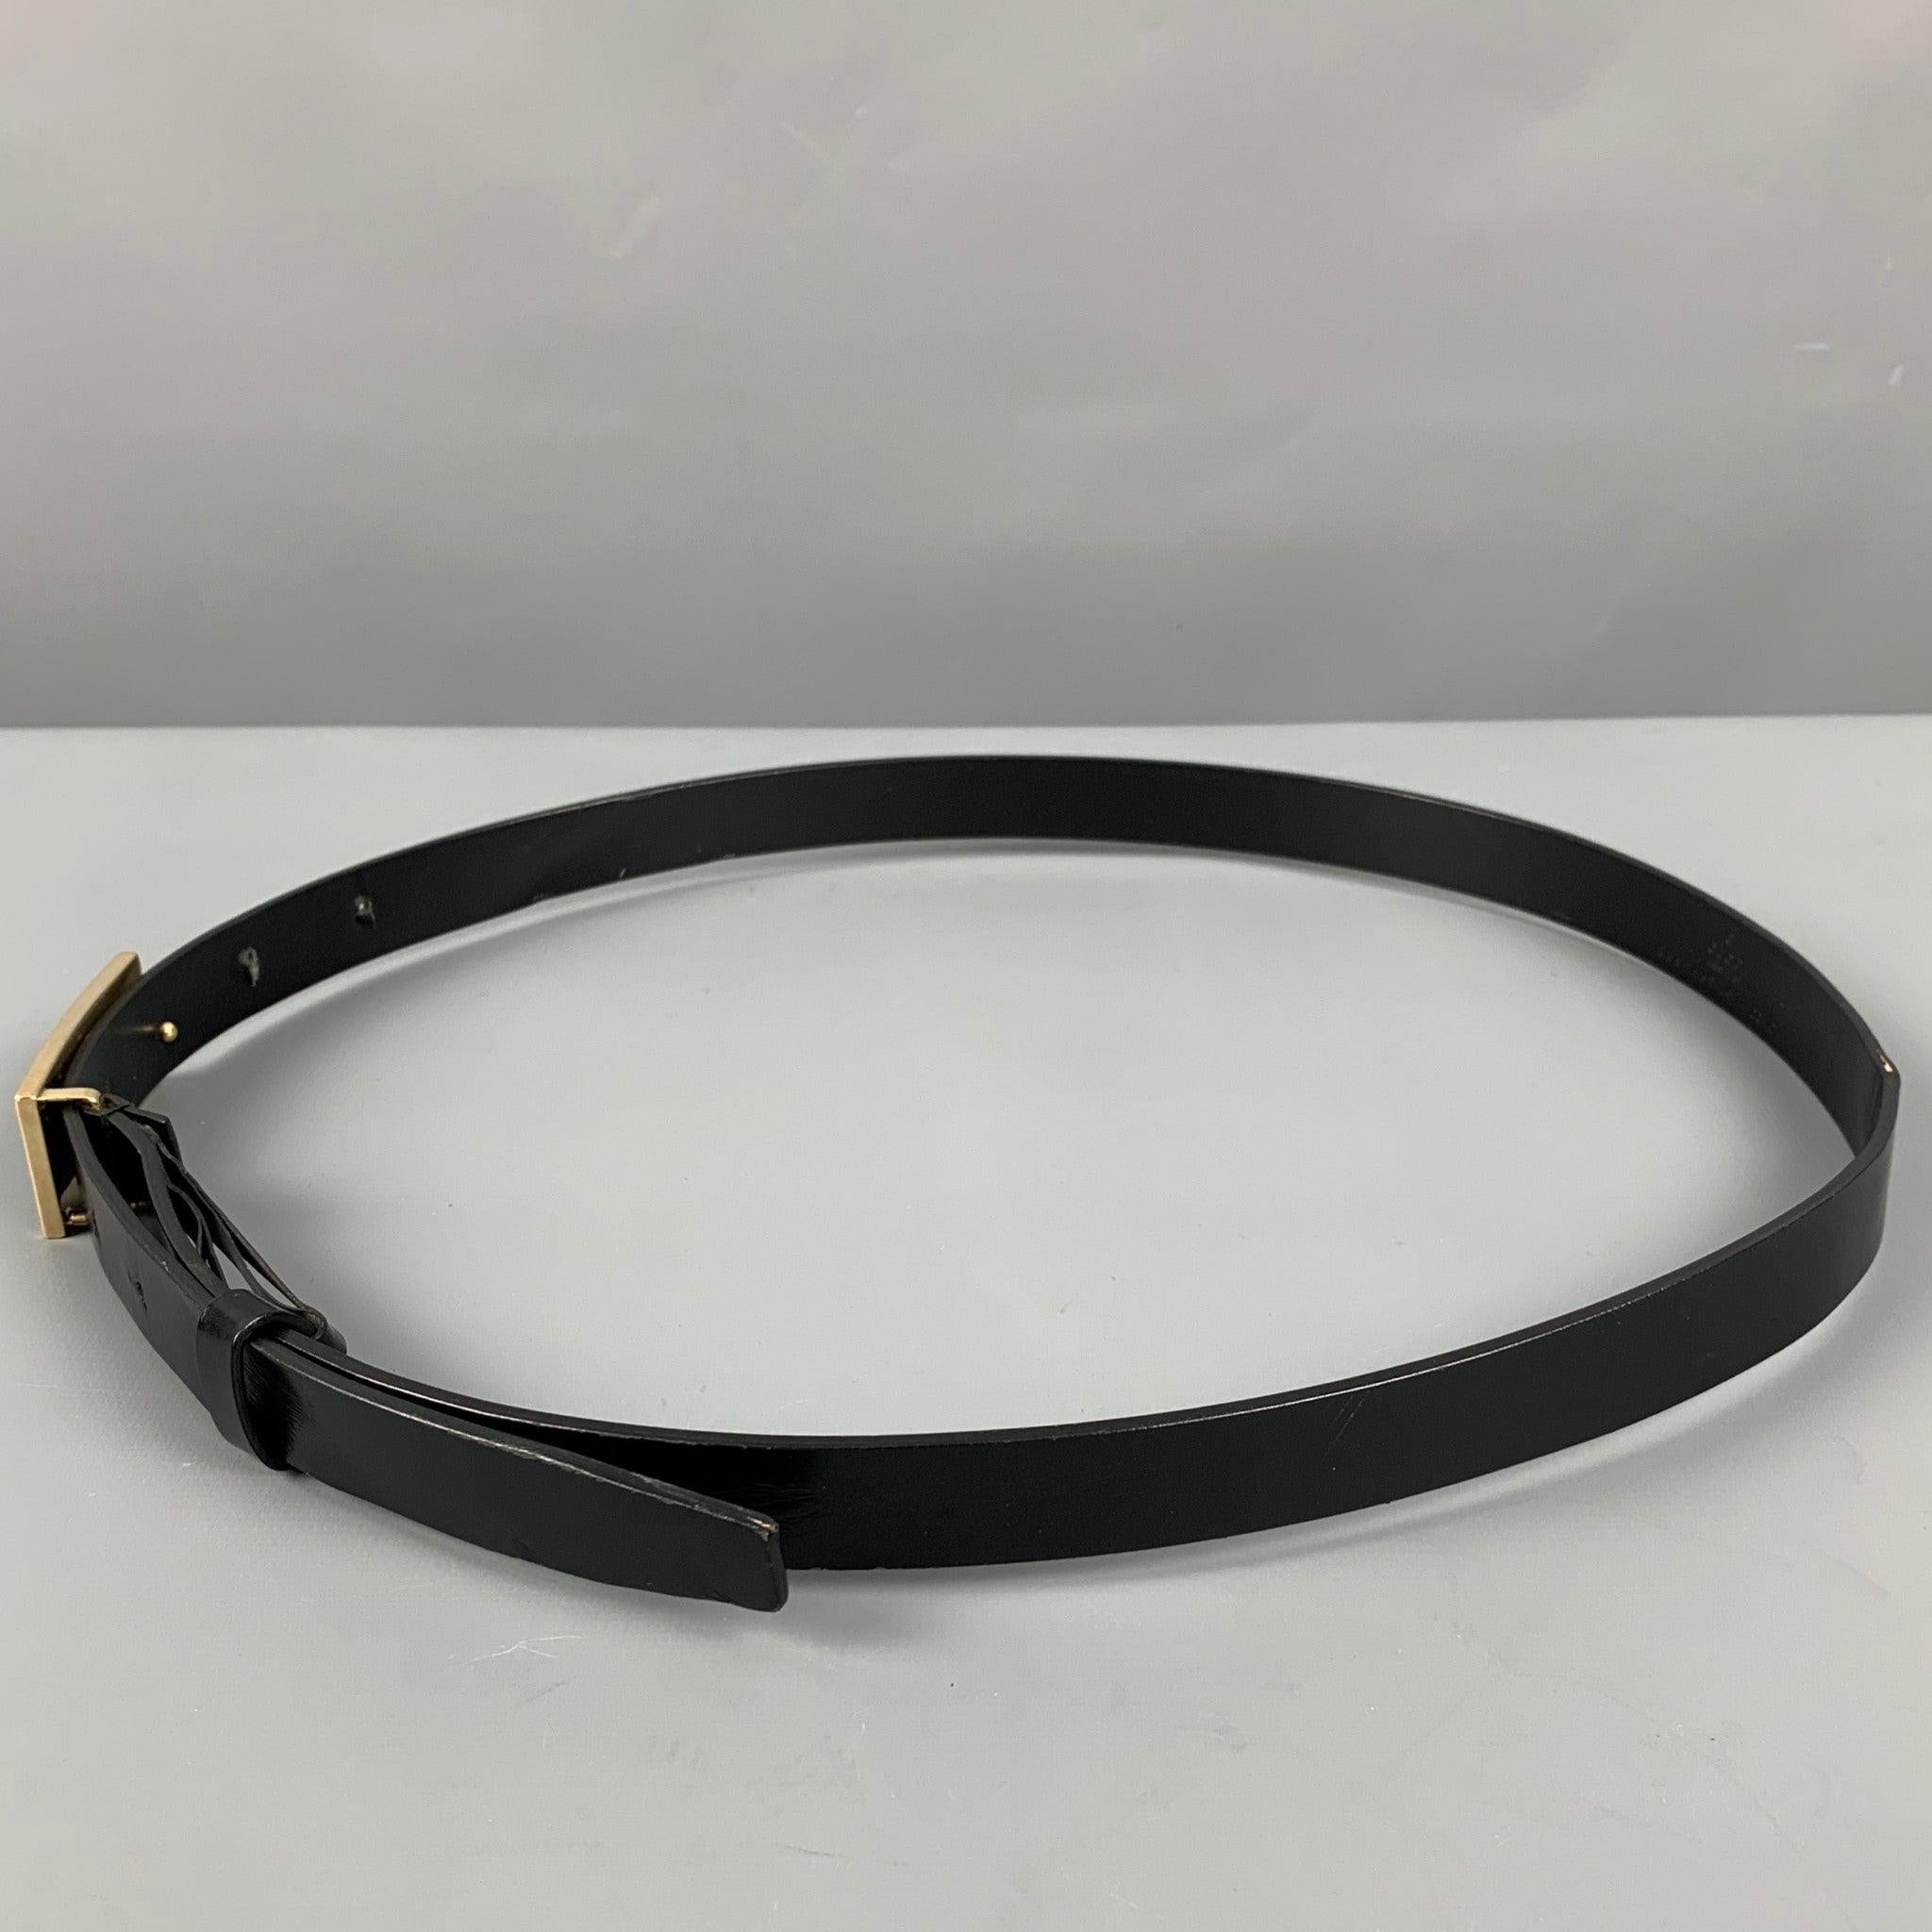 GUCCI
belt in a black leather featuring a red and black logo buckle. Made in Italy.Very Good Pre-Owned Condition. Moderate signs of wear. 

Marked:   036 1669 1612 100 40Length: 43.5 inches Width: 3/4 inches Fits: 32 inches  - 38 inches Buckle: 2.25